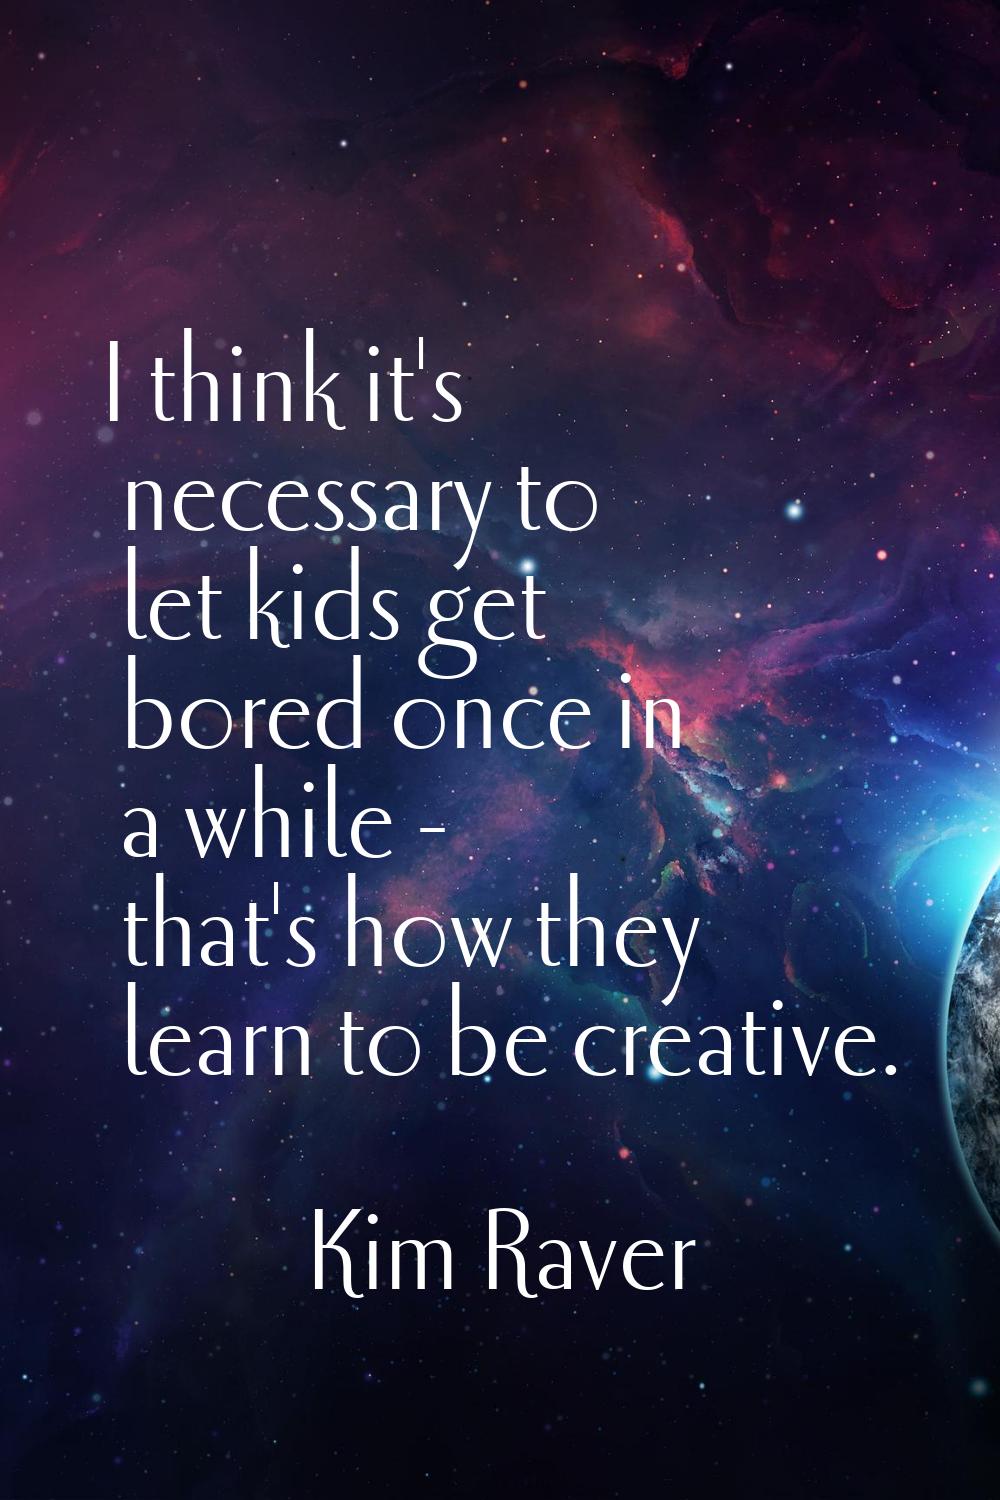 I think it's necessary to let kids get bored once in a while - that's how they learn to be creative